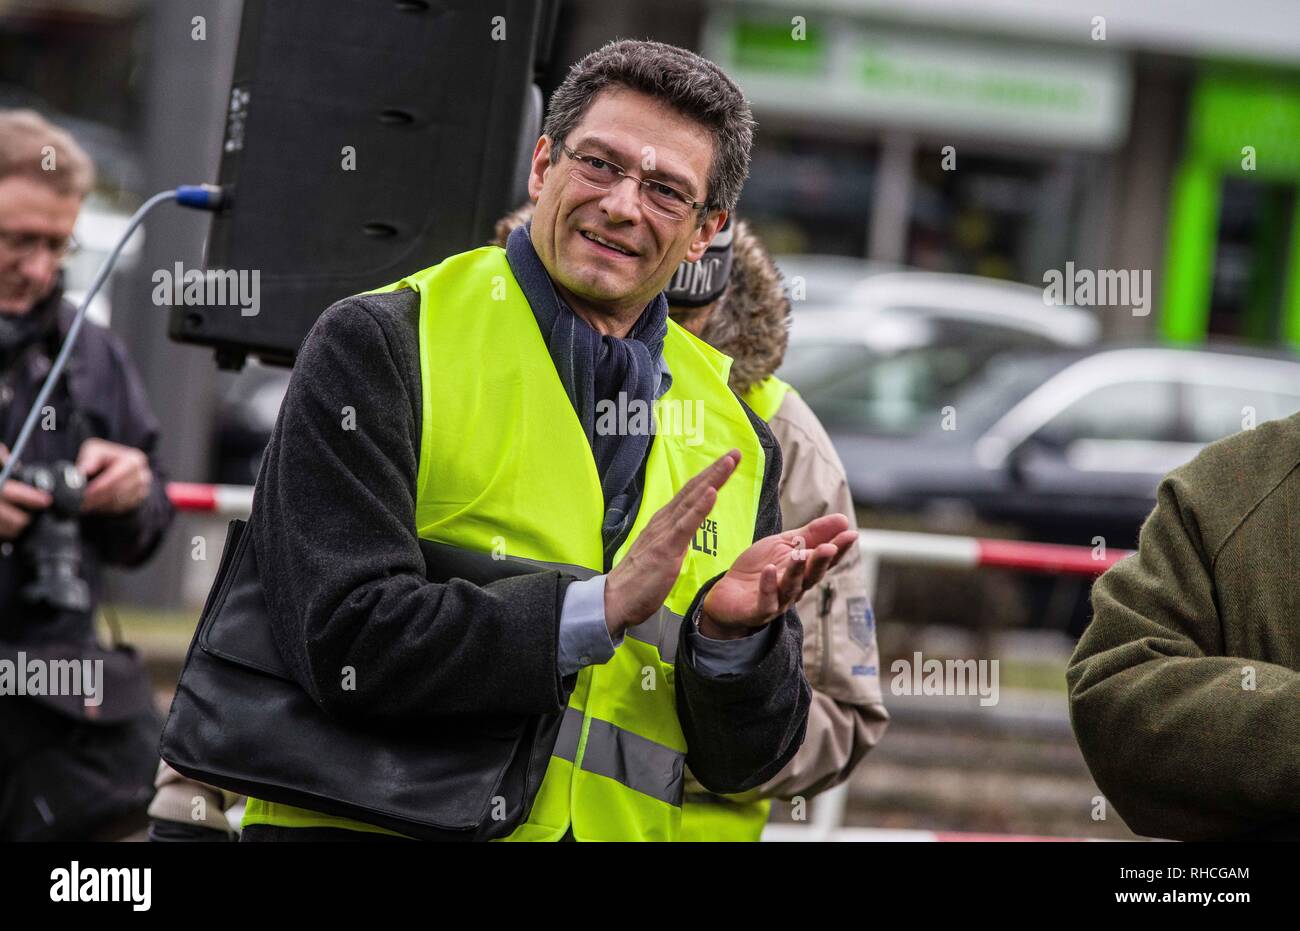 Munich, Bavaria, Germany. 2nd Feb, 2019. Wolfgang Wiehle of the far right Alternative for Germany AfD party supported the group and was also a speaker. Responding to the prospect of diesel auto bans in major cities in Germany, protestors assembled at an air quality monitoring station in Munich's city center. The event was organized by the Mobil in Deutschland automobile club and is the first protest against the diesel ban in Munich- the home of BMW. Numerous well-known right-extremists and far-right political figures were in attendance and participated, including numerous members of t Credit: Stock Photo